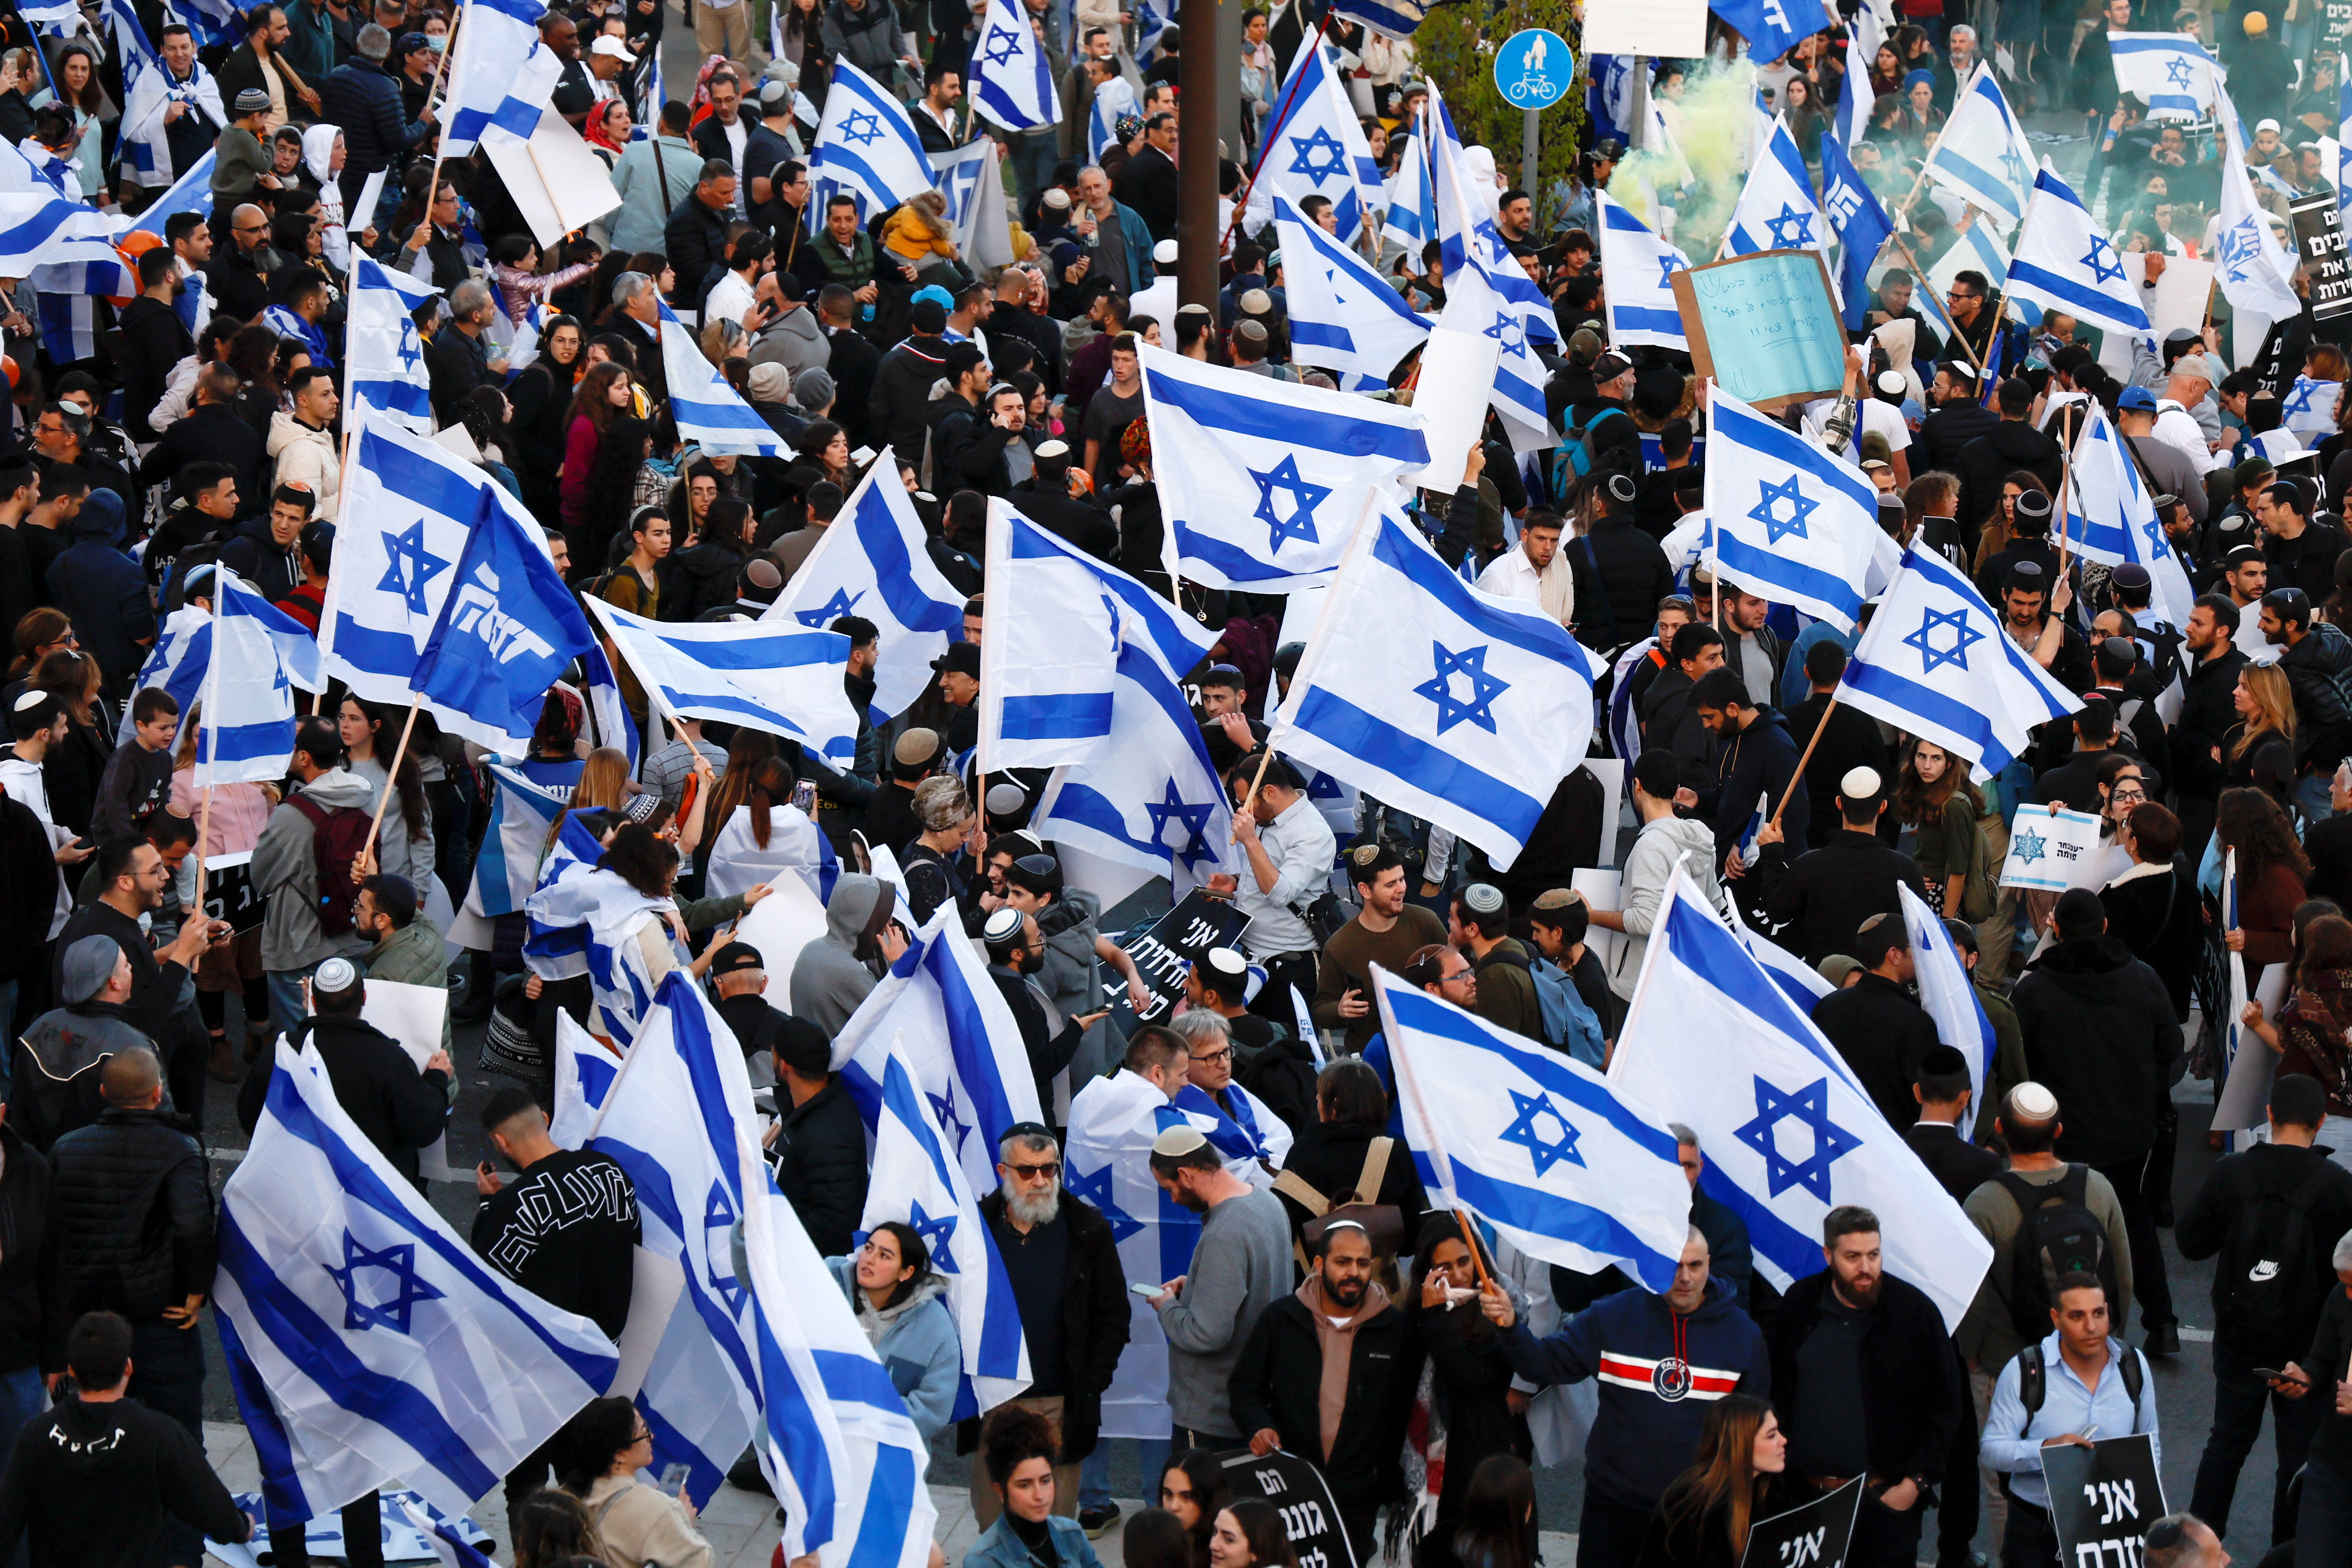 Demonstrators come out in support of Israel's nationalist coalition government and its plans for a judicial overhaul, in Jerusalem